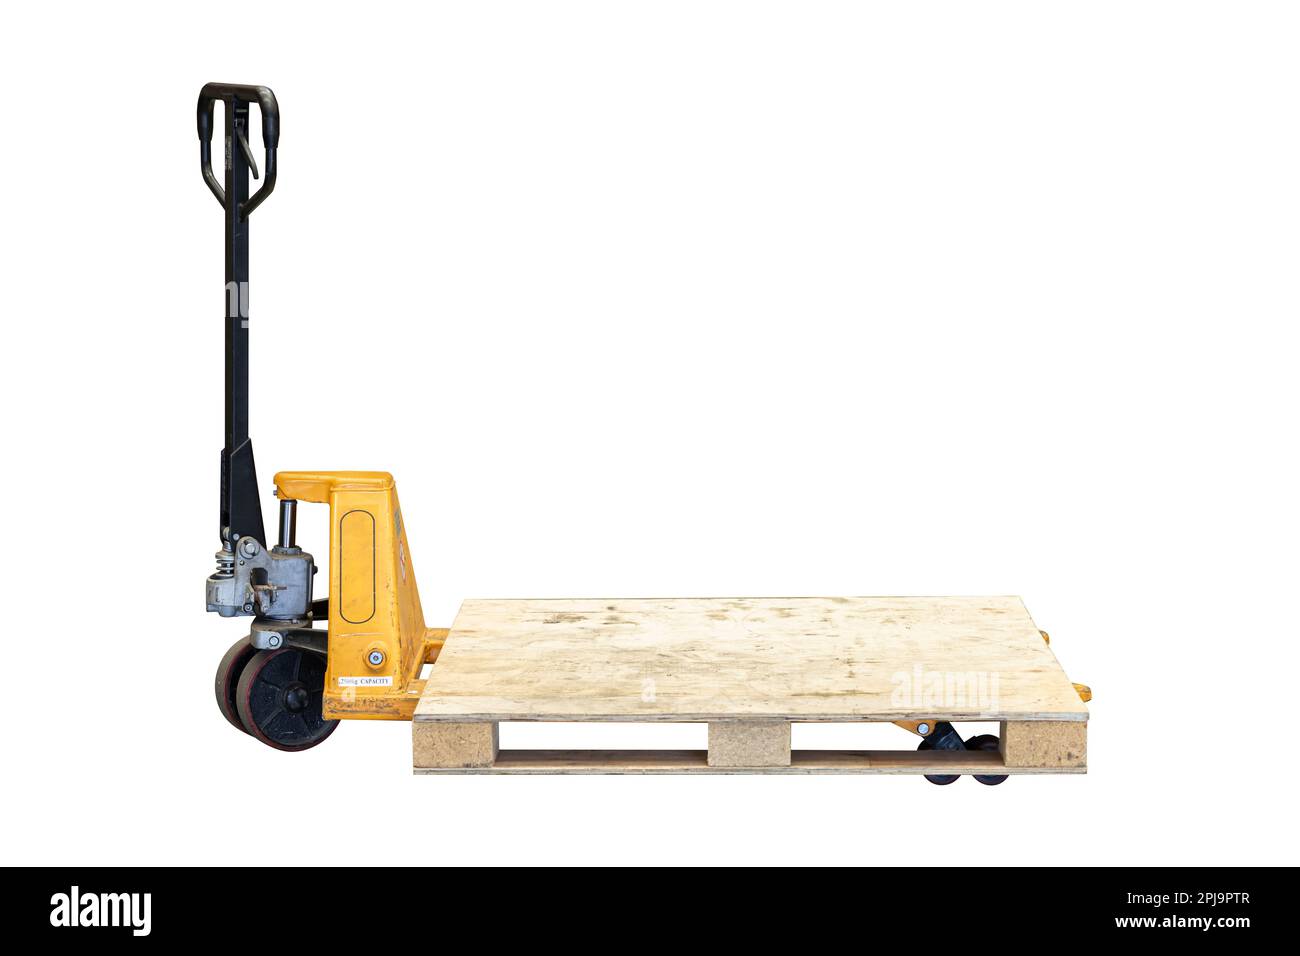 Hand Pallet Truck Manual Pallet Lifting Cargo Move Tool isolated on white background Stock Photo